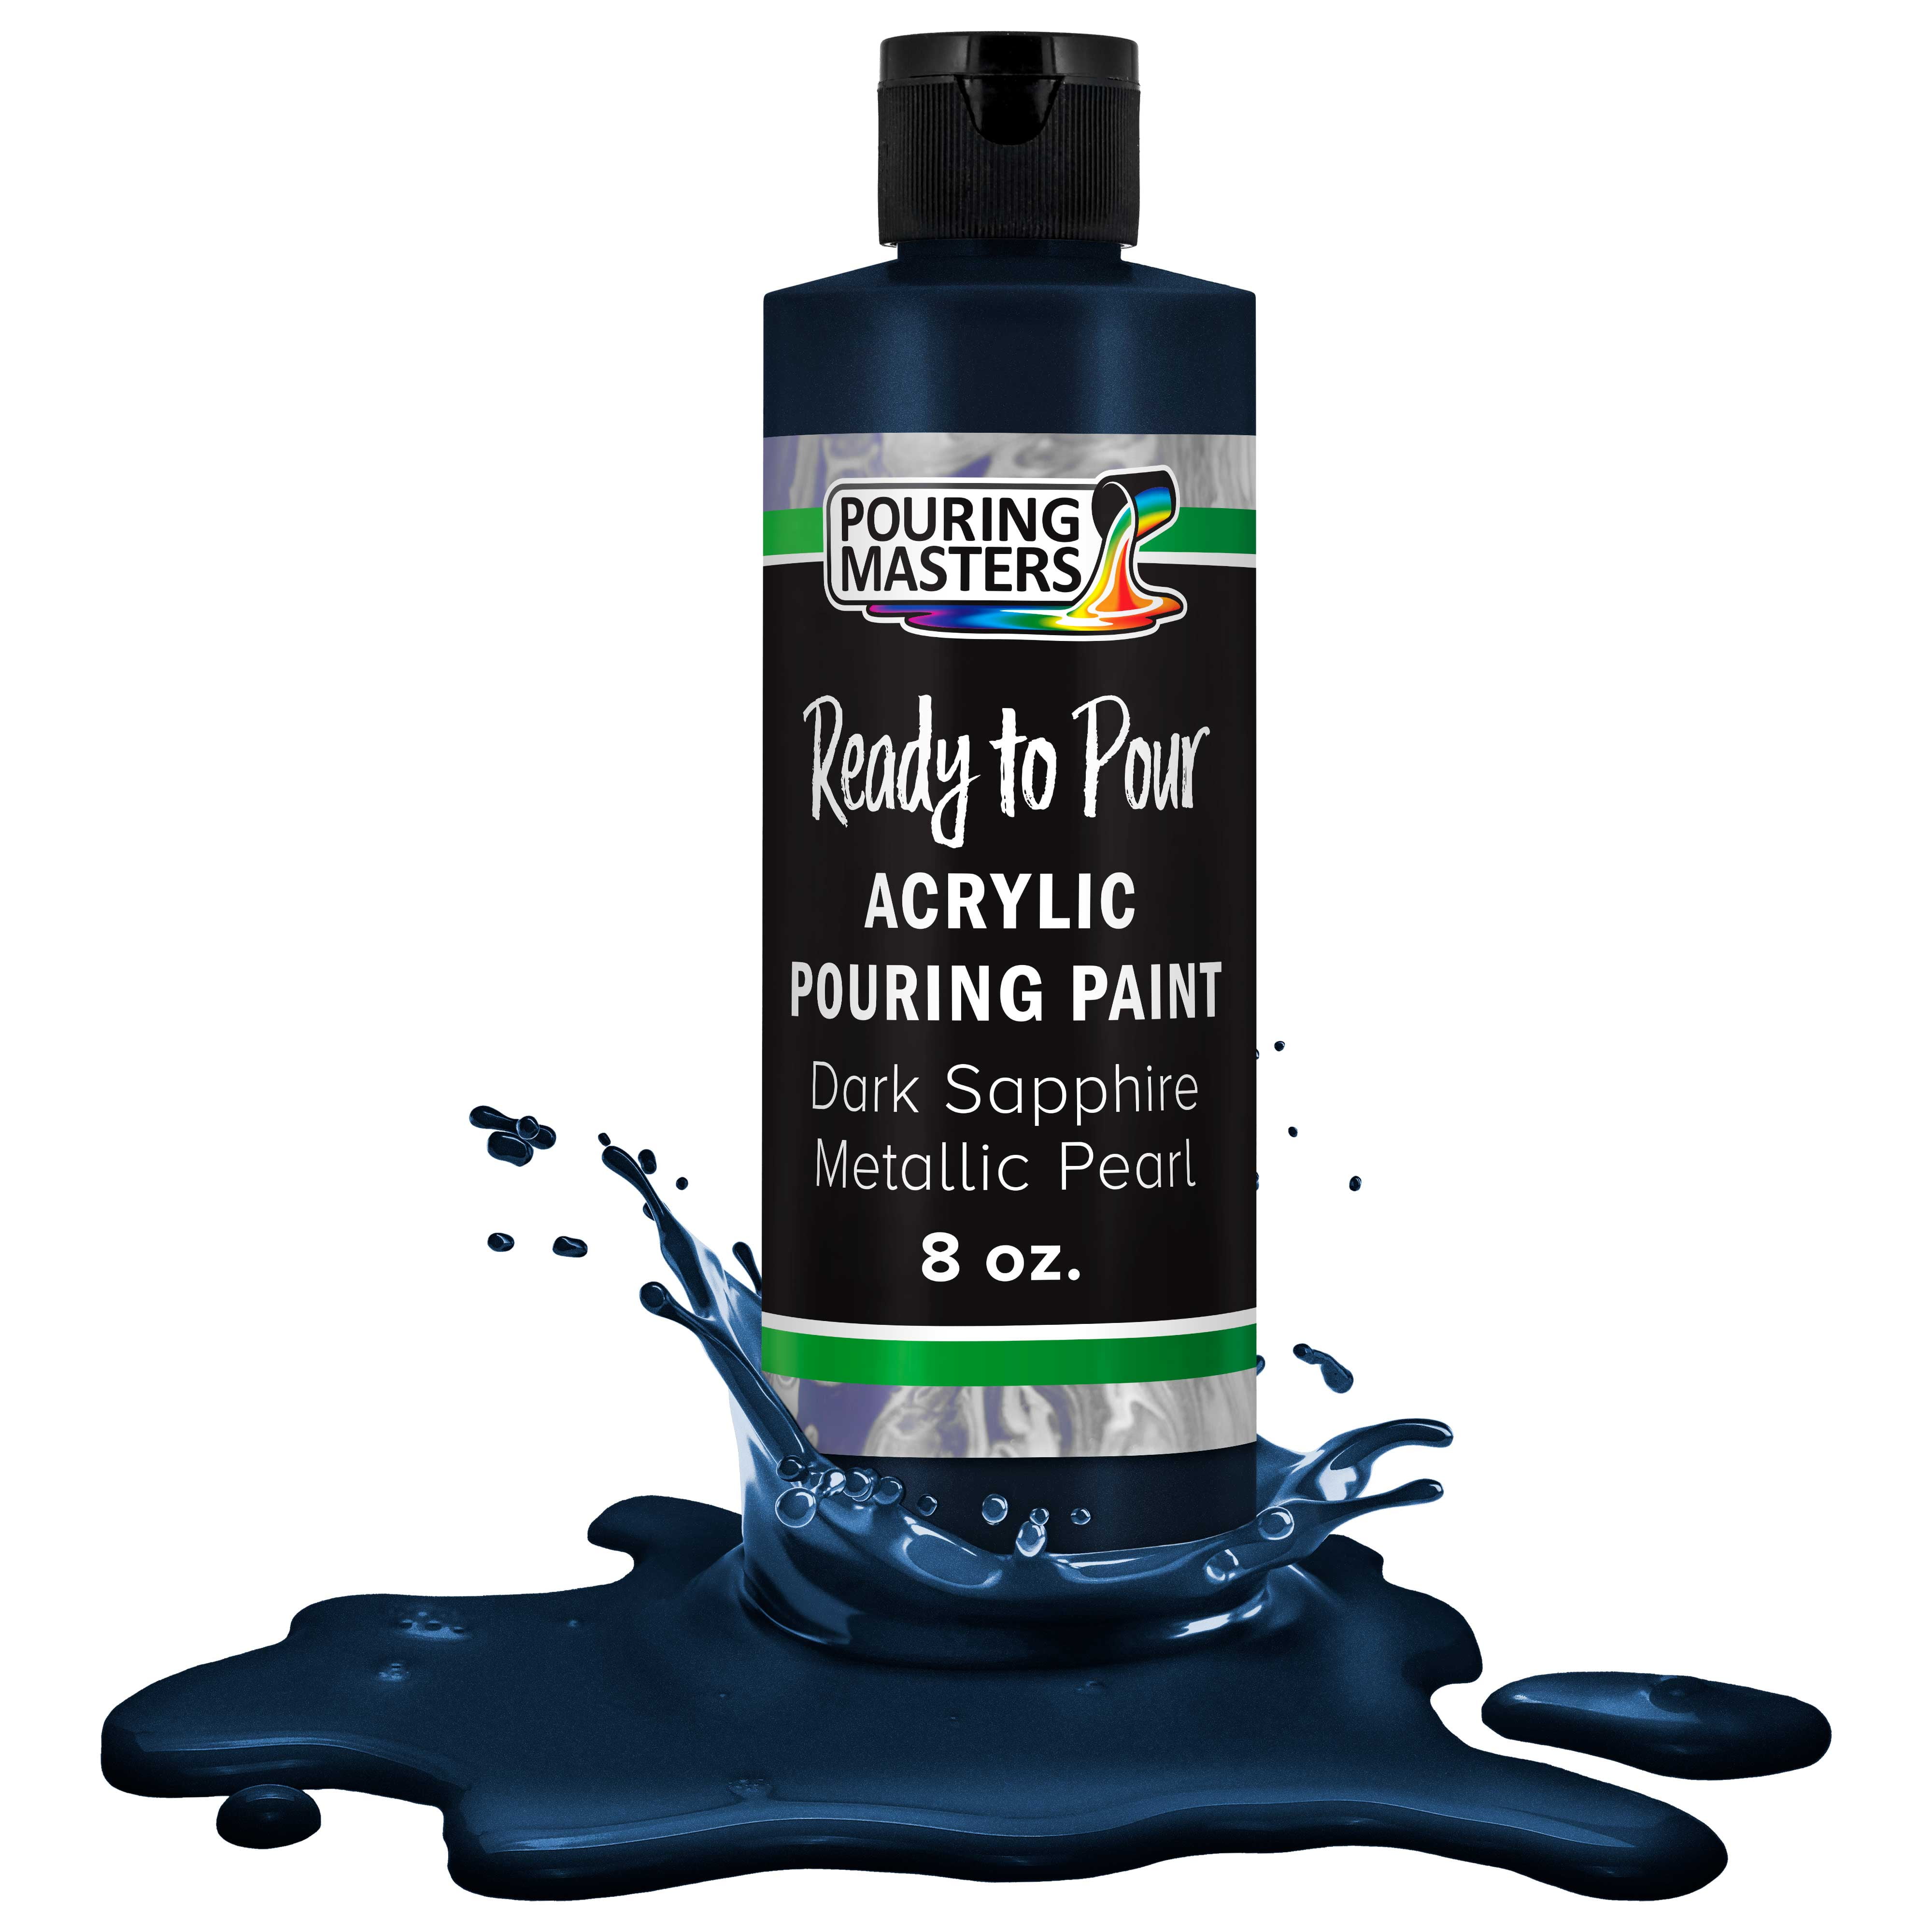 Shuttle Art Acrylic Pouring Paint, Set of 36 Bottles (2 oz/60ml) Pre-Mixed High-Flow Acrylic Paint Pouring Supplies with Canvas, Silicone Oil, Measuri